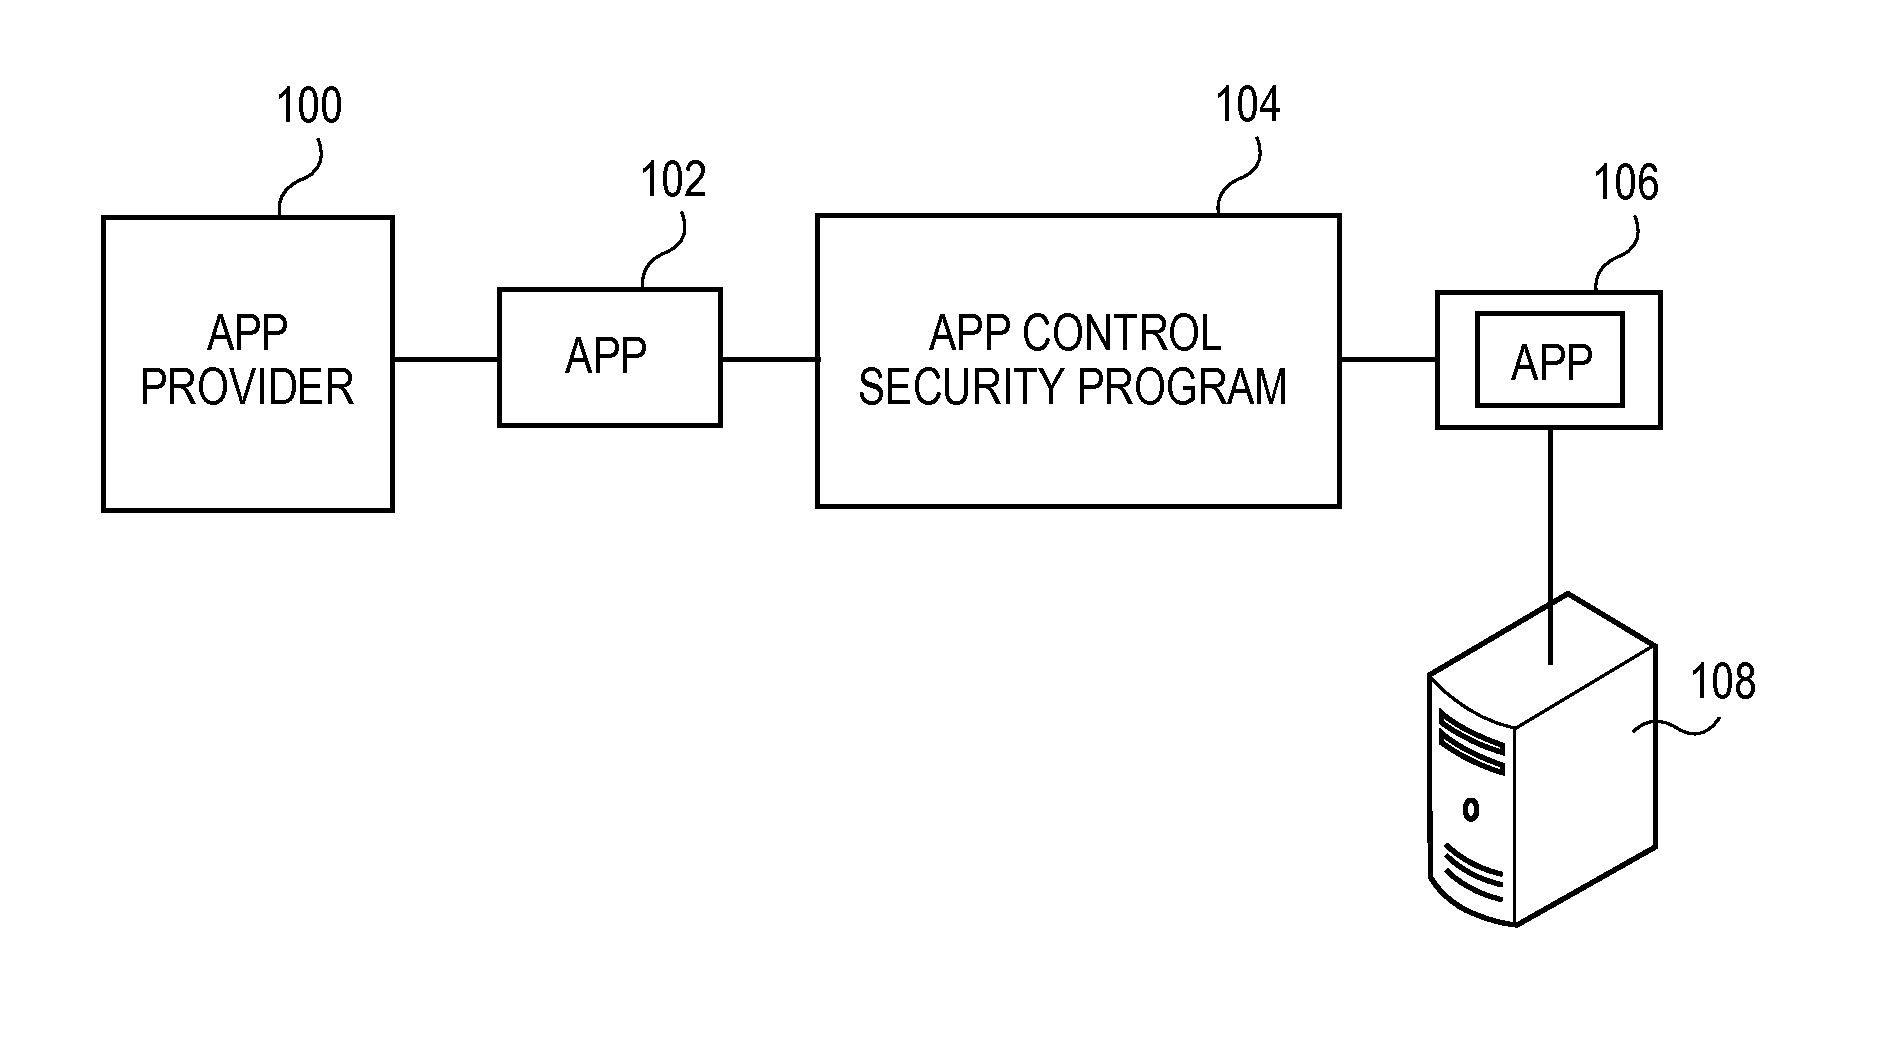 Extensible platform for securing apps on a mobile device using policies and customizable action points